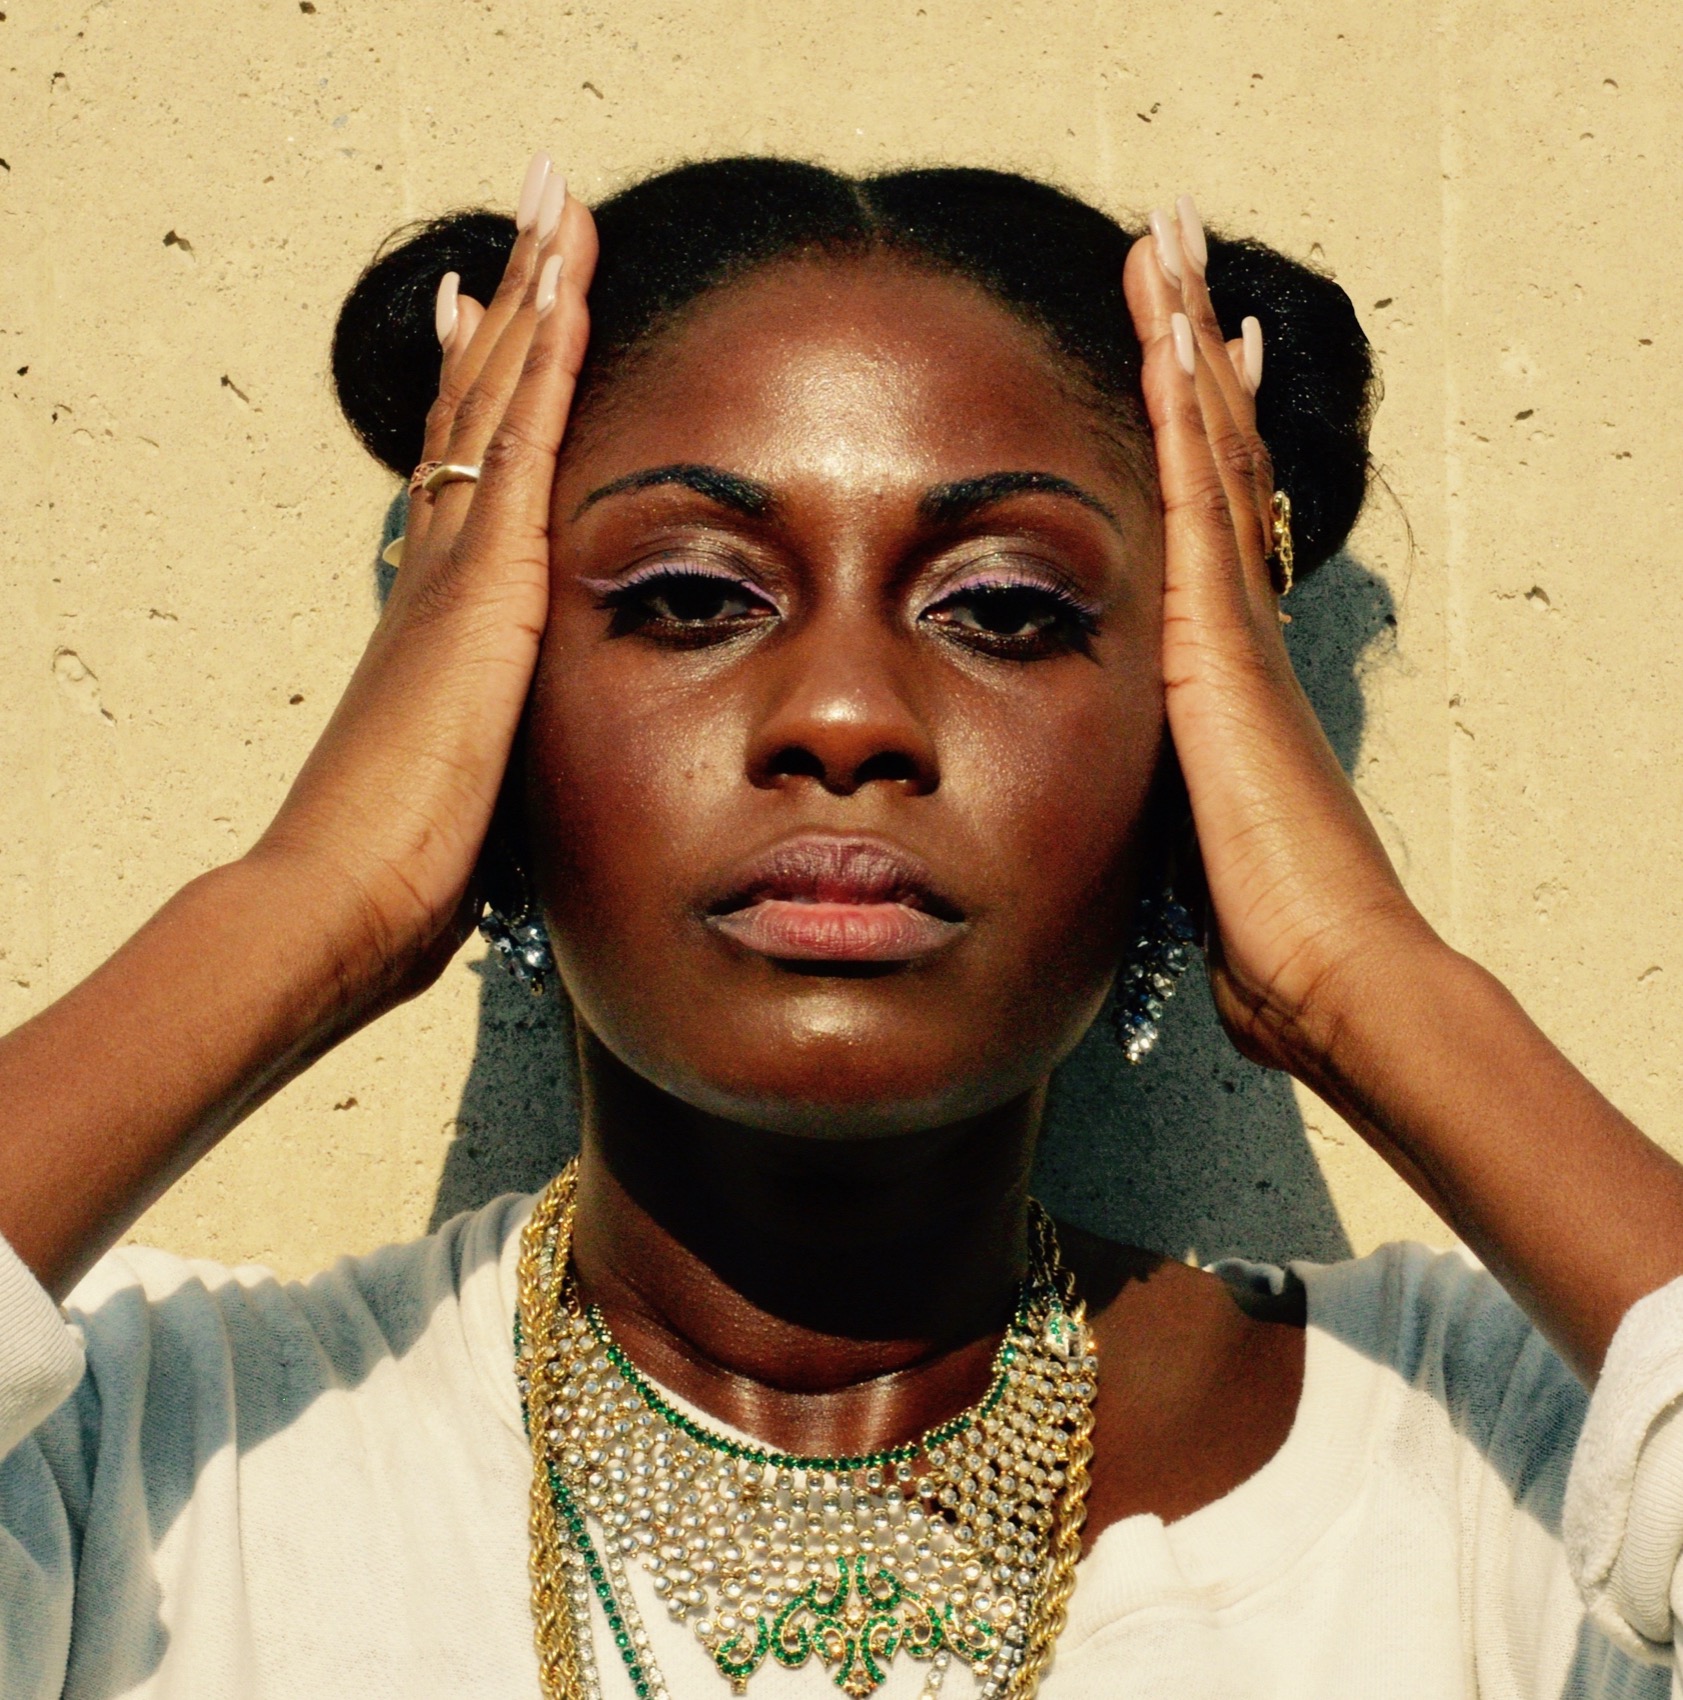 a Black woman against a wall holding her hands to the sides of her face looking directly at the camera